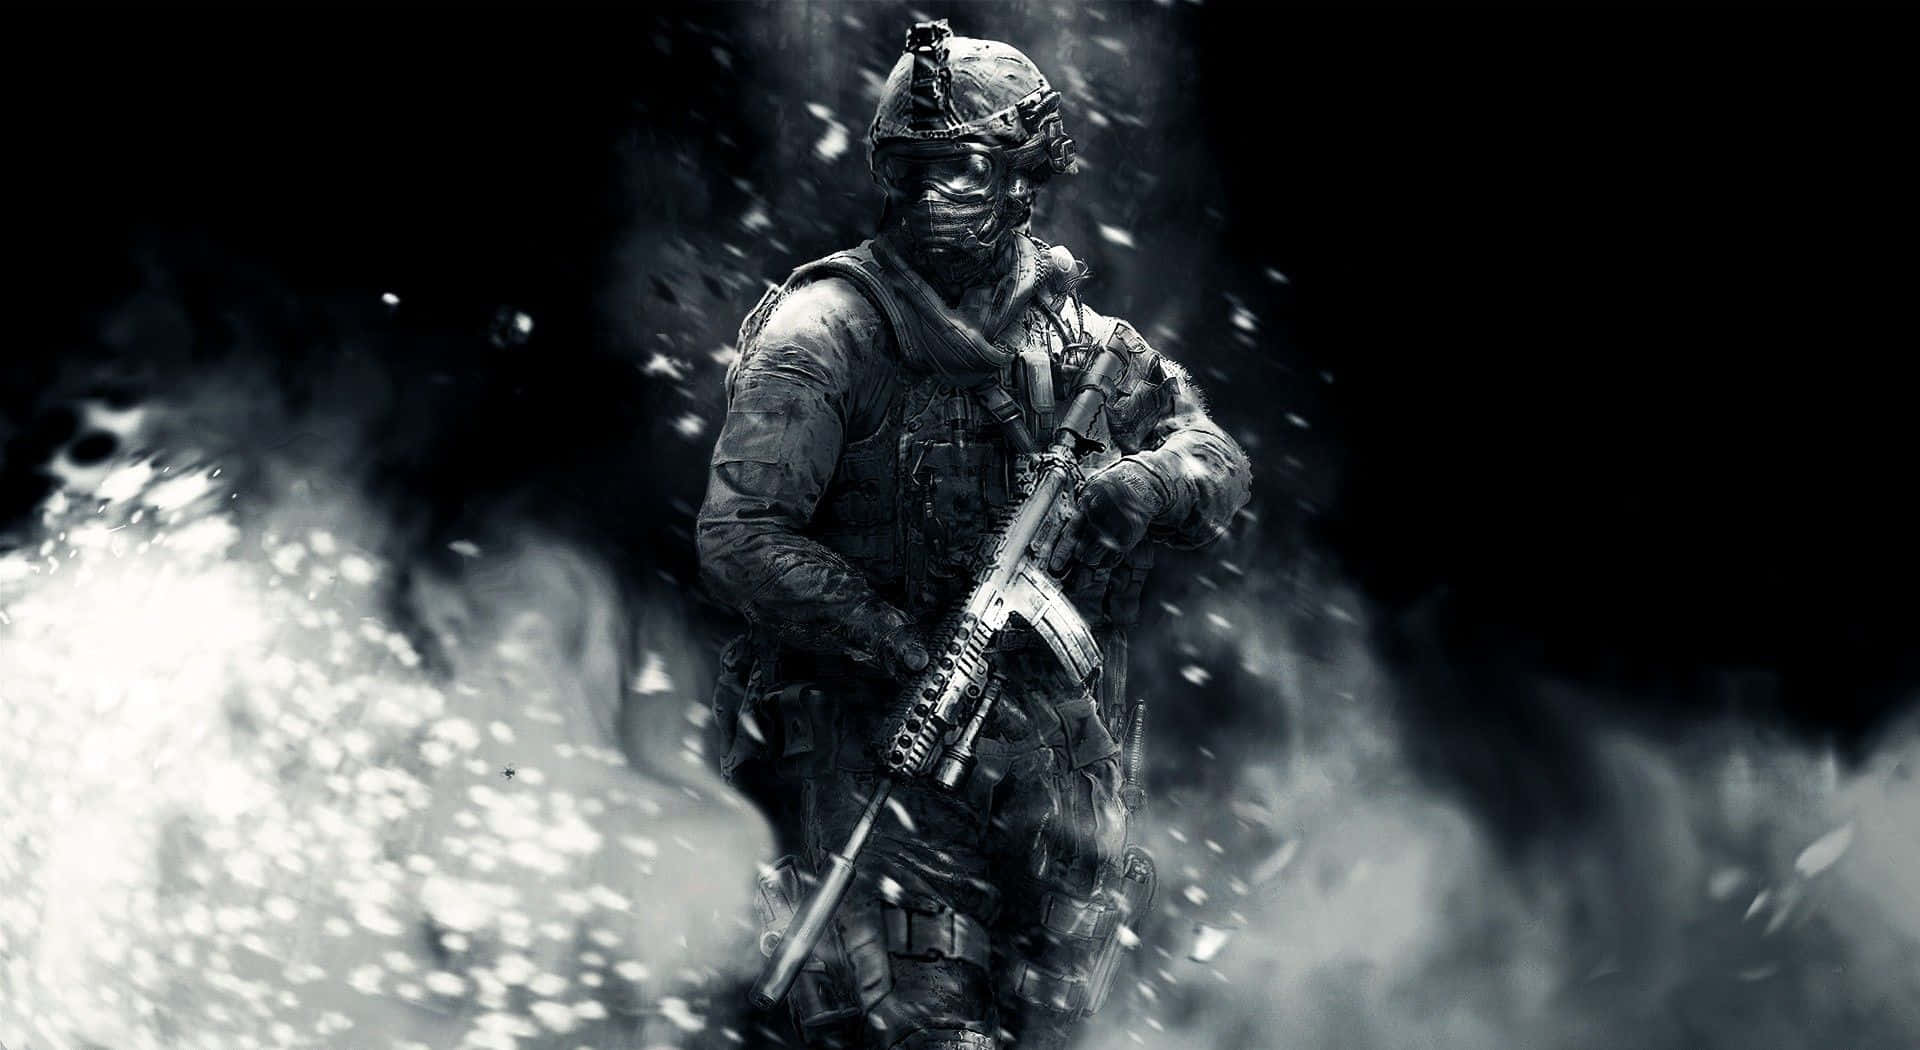 Play modern warfare with the Call of Duty video game